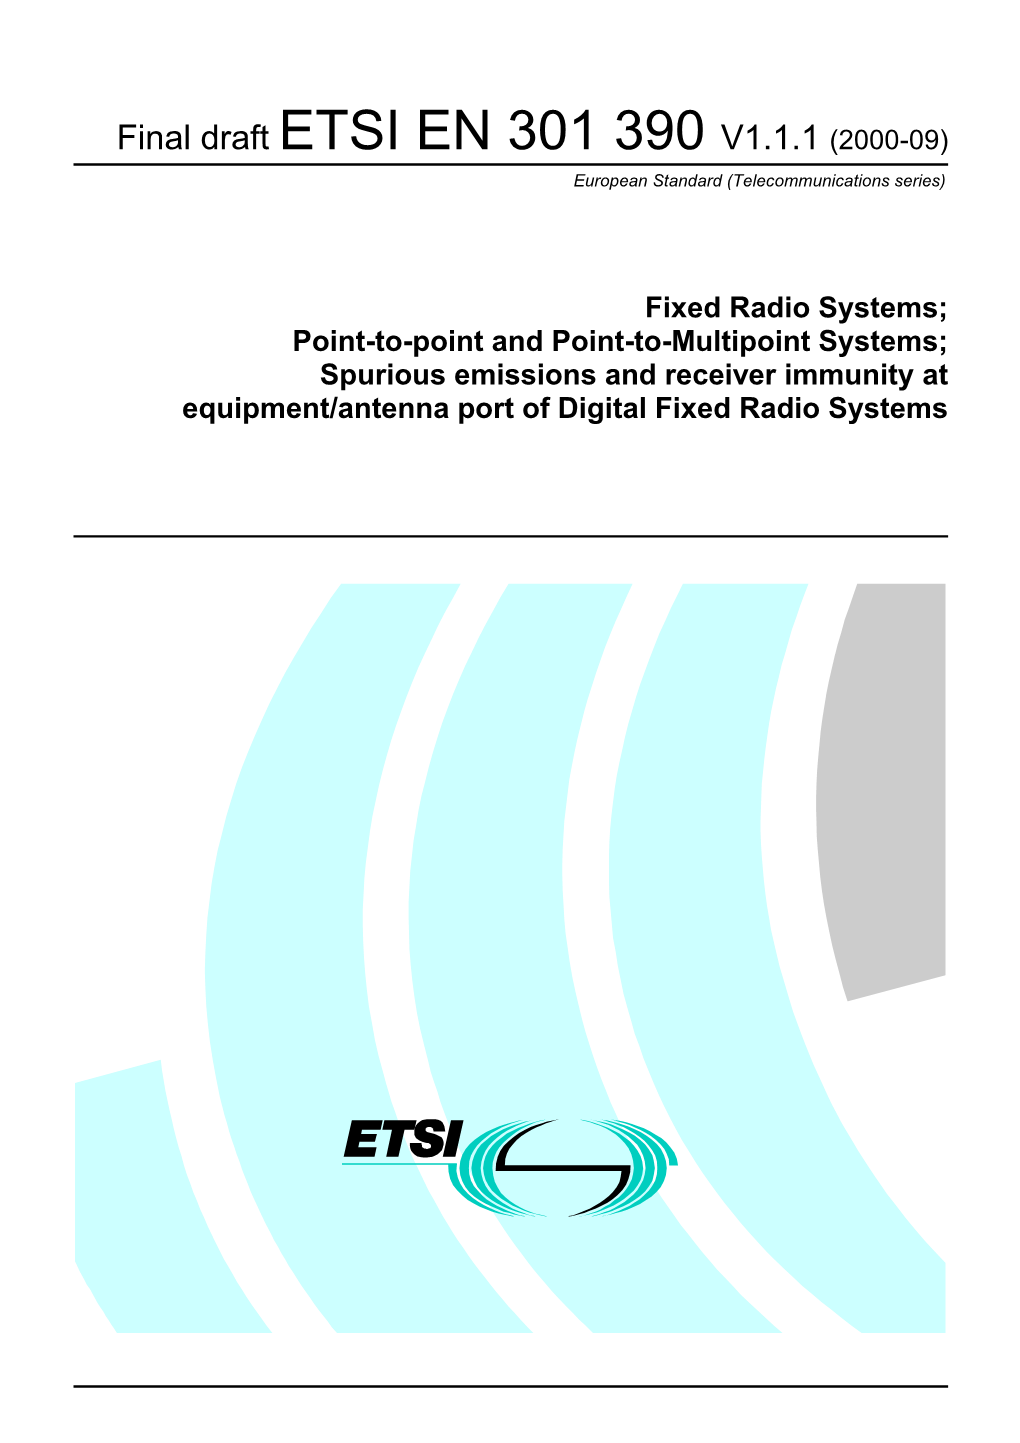 Spurious Emissions and Receiver Immunity at Equipment/Antenna Port of Digital Fixed Radio Systems 2 Final Draft ETSI EN 301 390 V1.1.1 (2000-09)